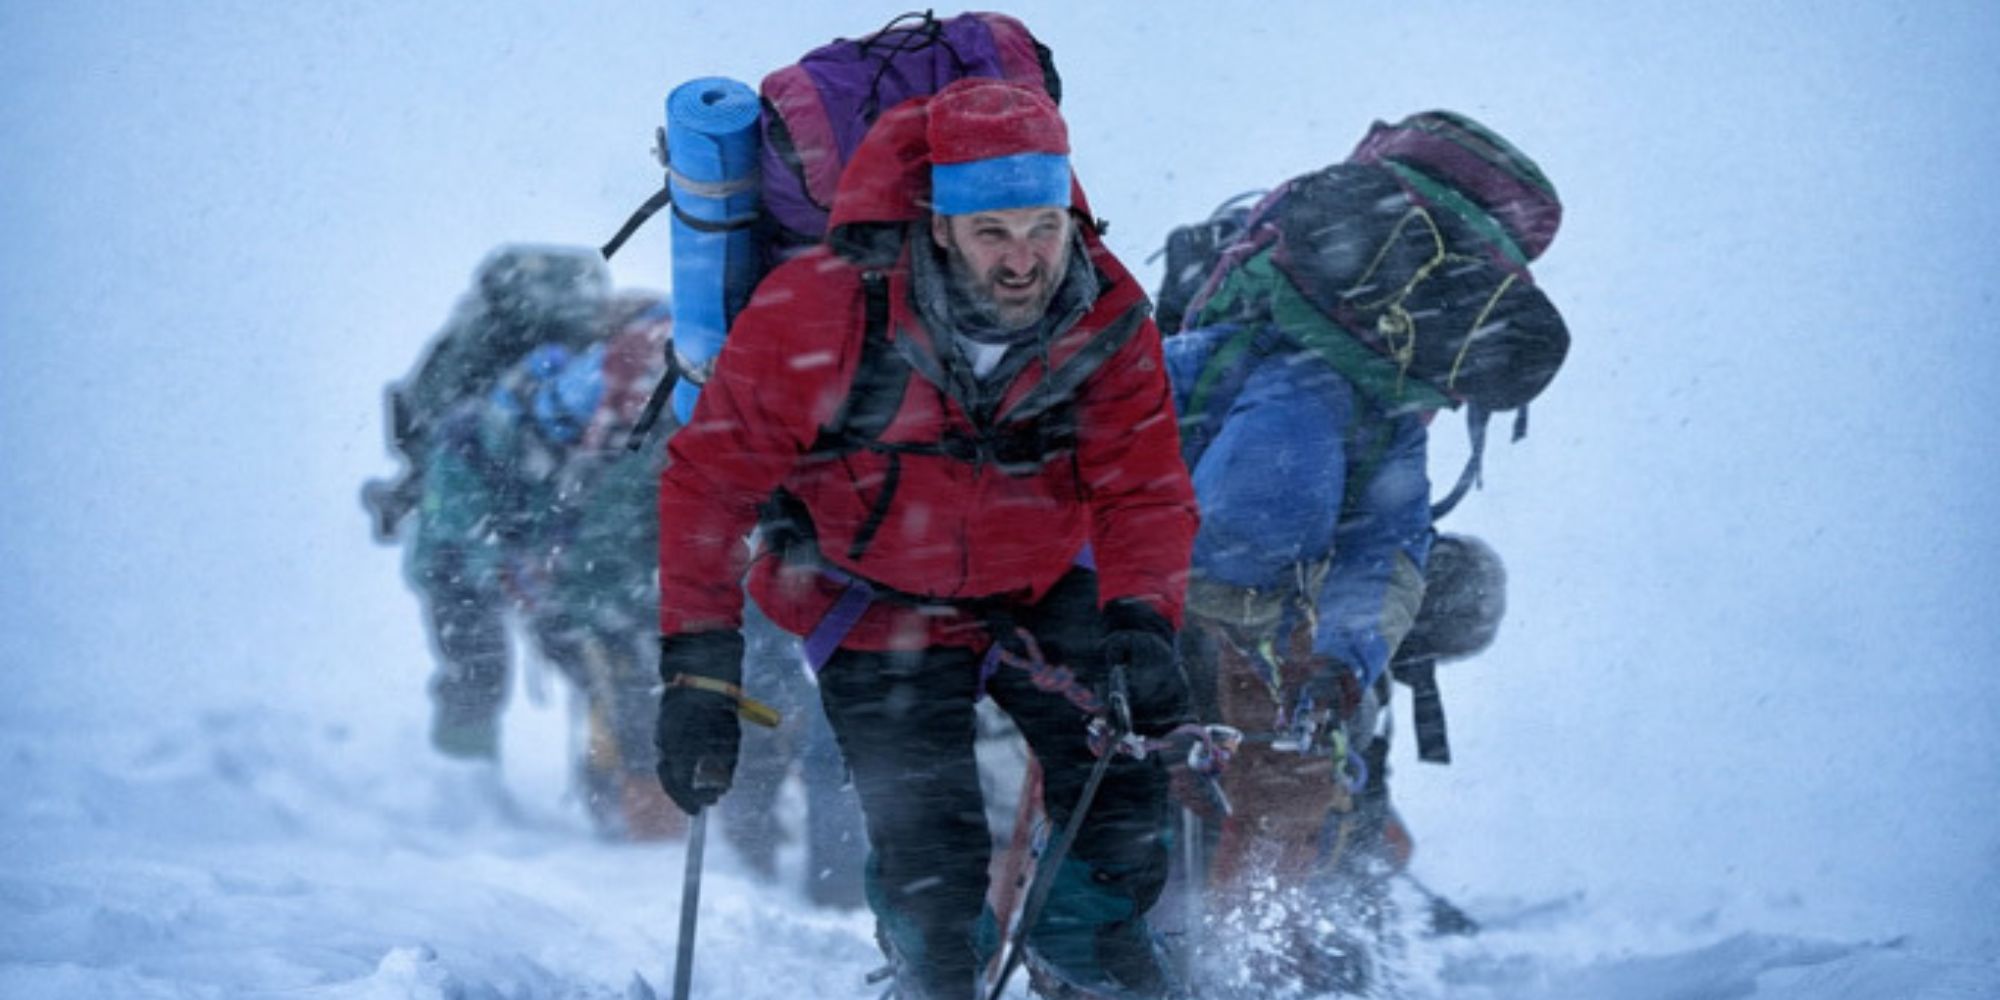 Jason Clarke as Rob Hall in a scene from Everest.